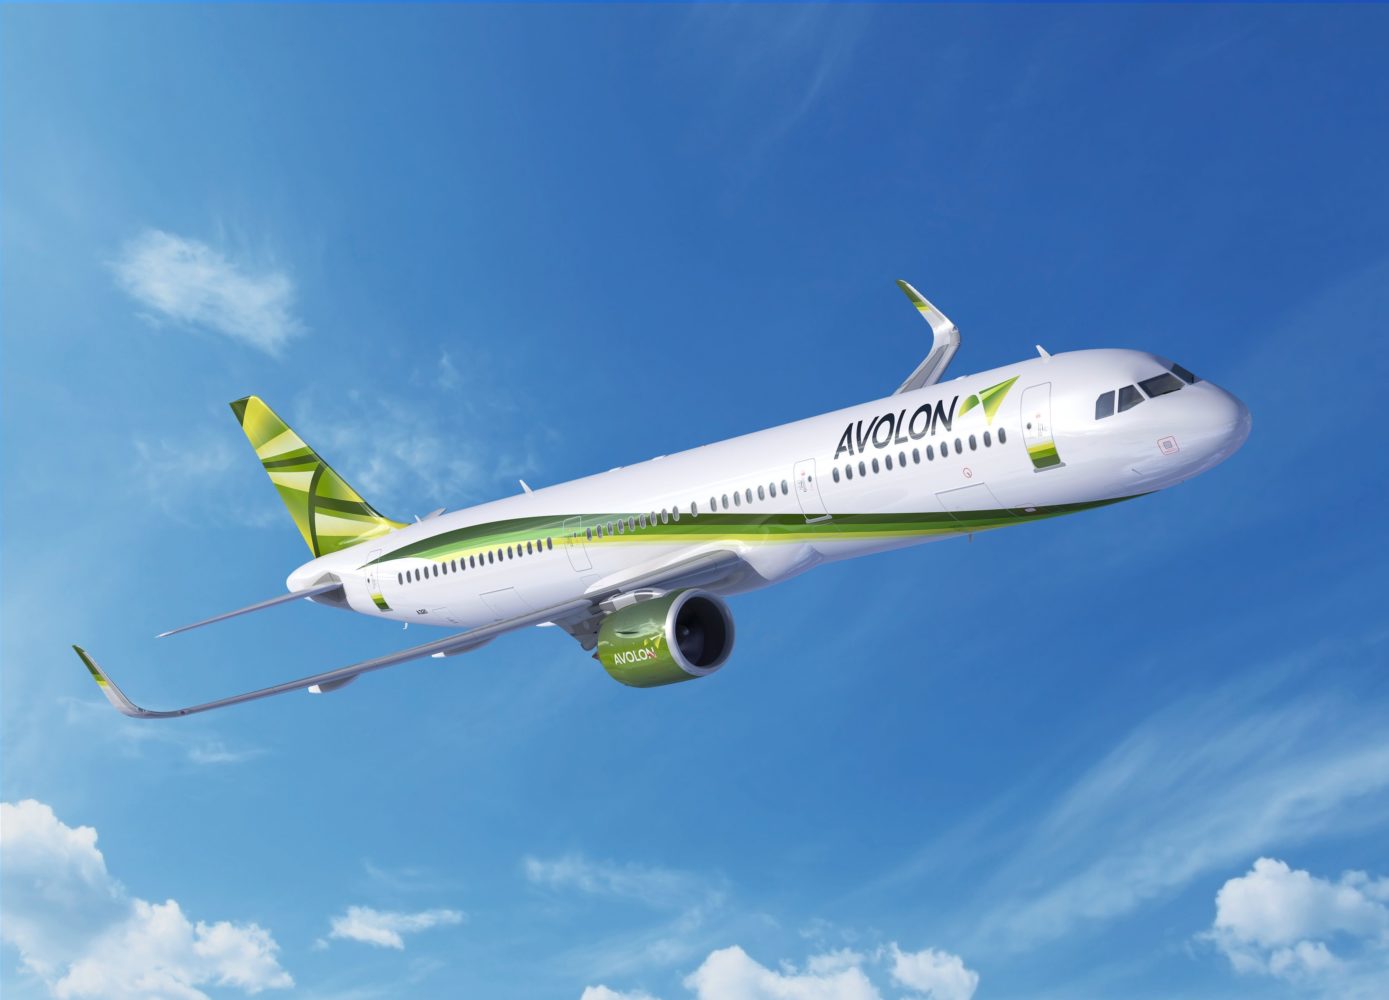 Avolon signs firm order for 100 Airbus A320 Family aircraft